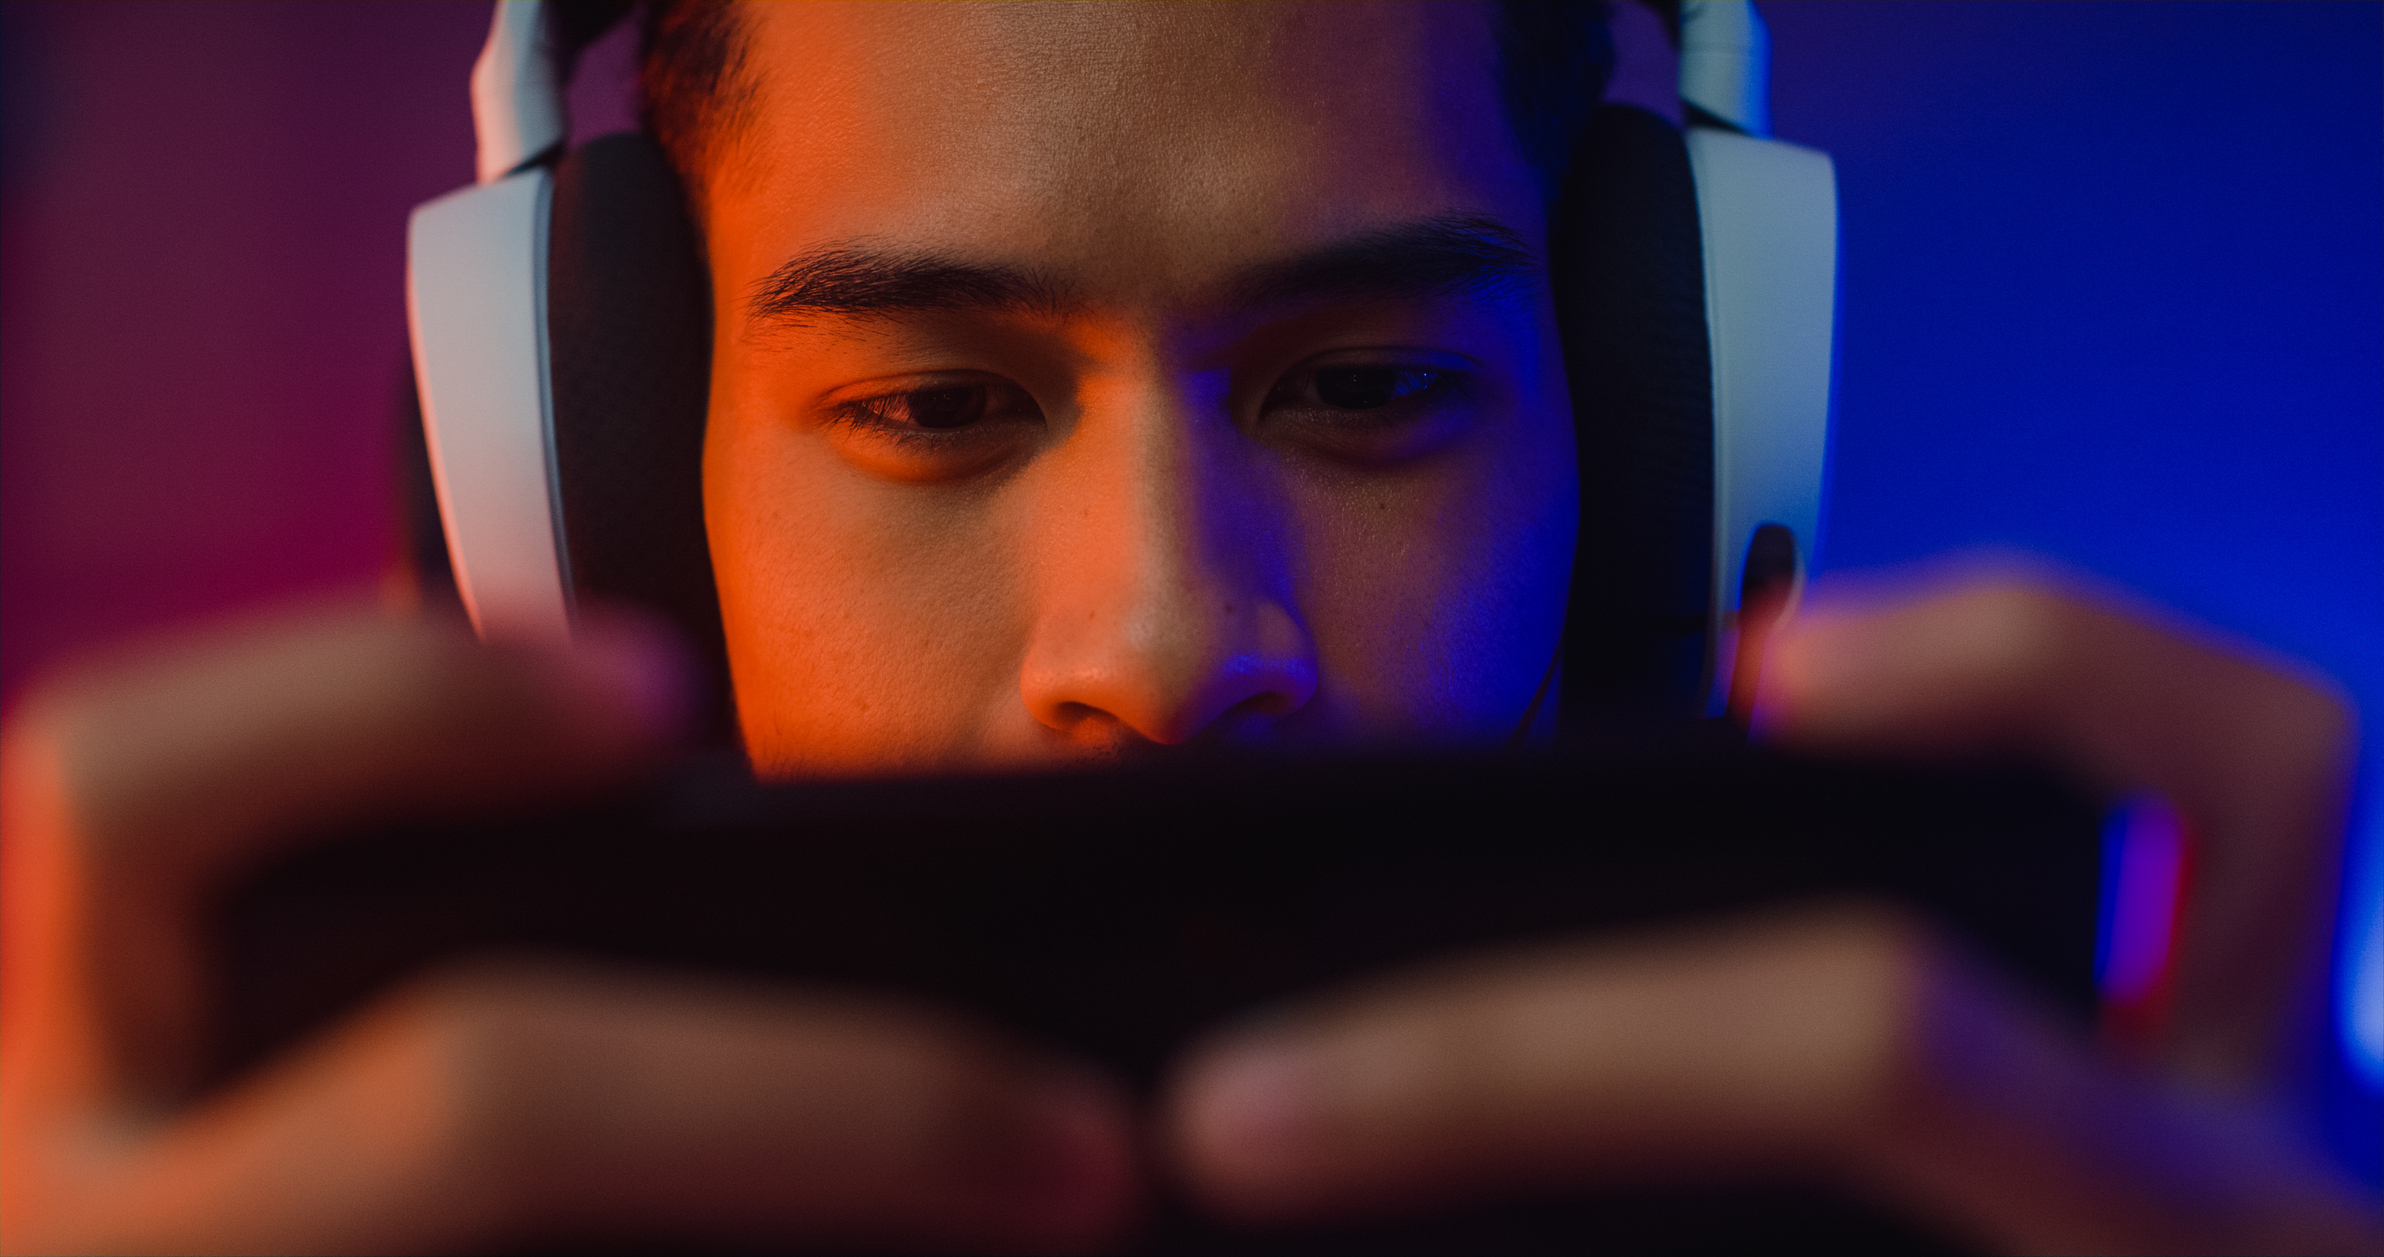 Gamer with headphones playing a mobile game